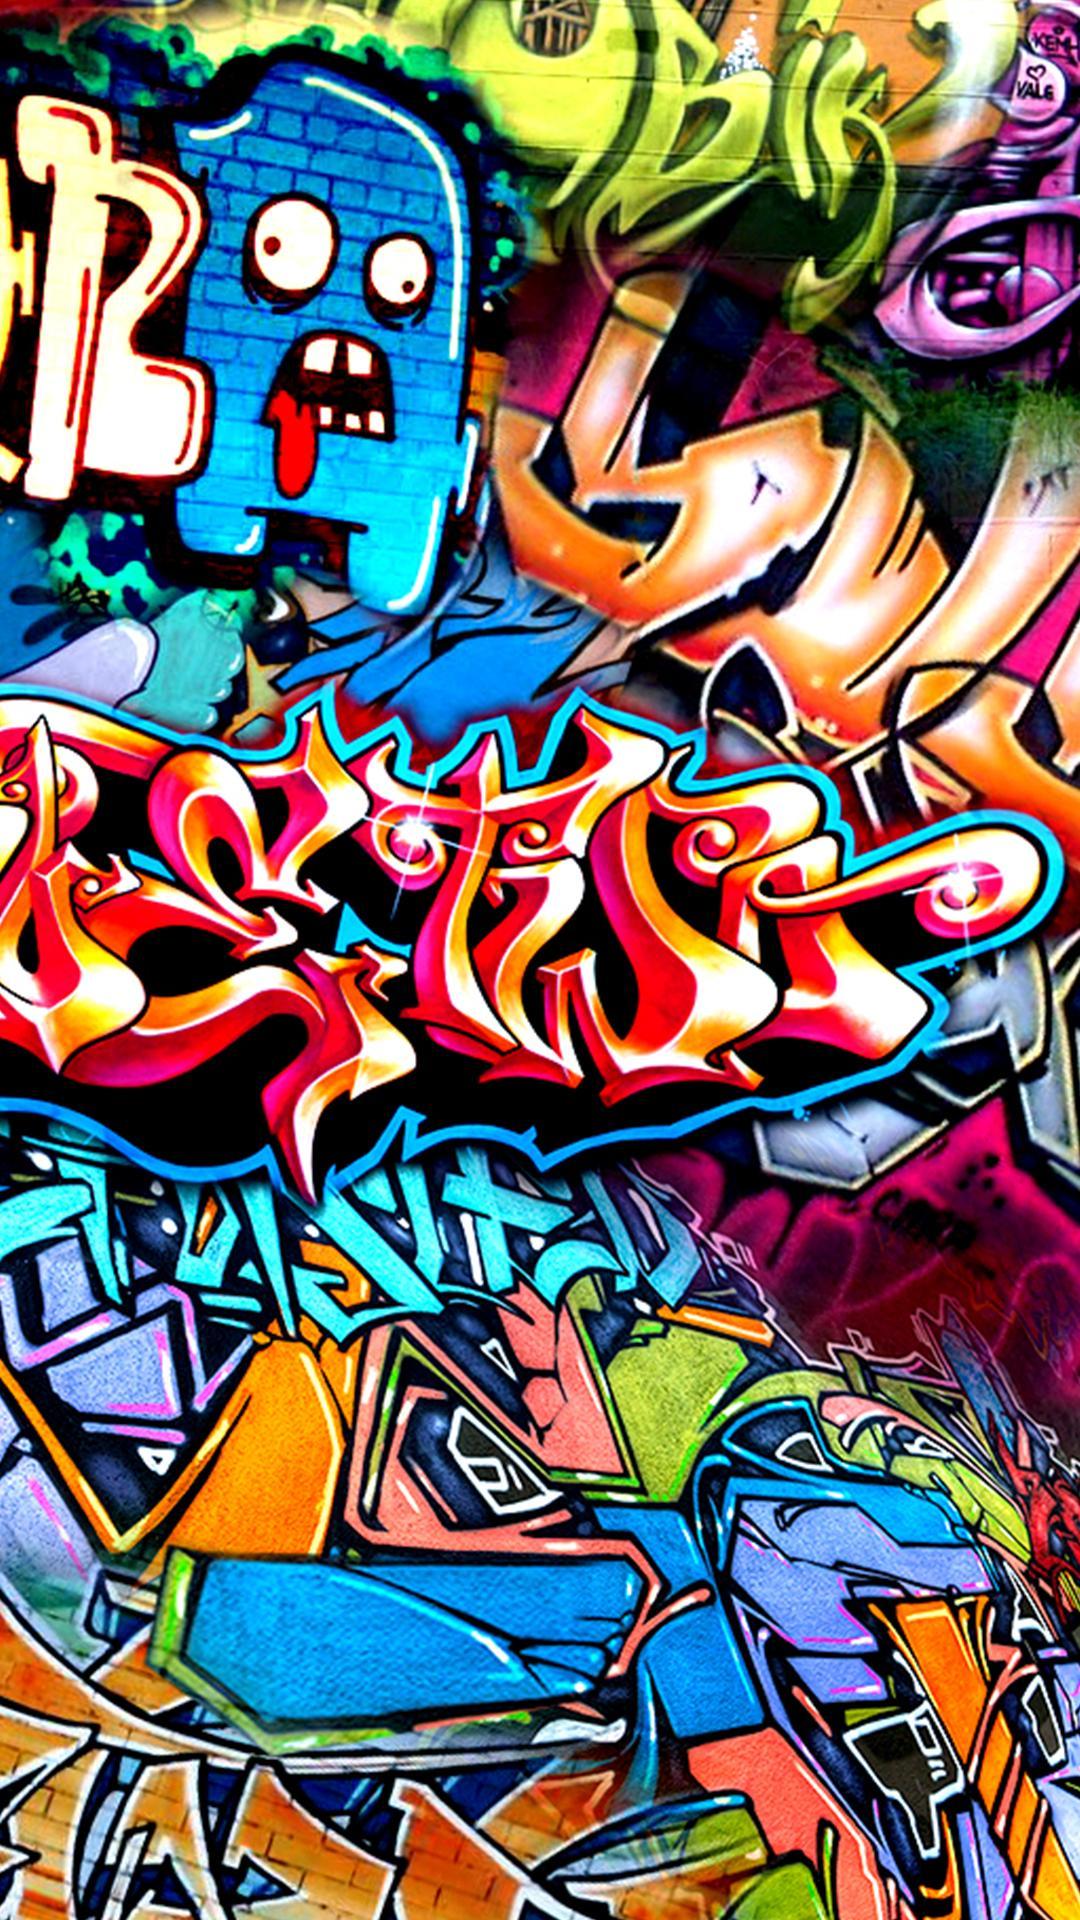  Graffiti  wallpapers  HD  for Android APK  Download